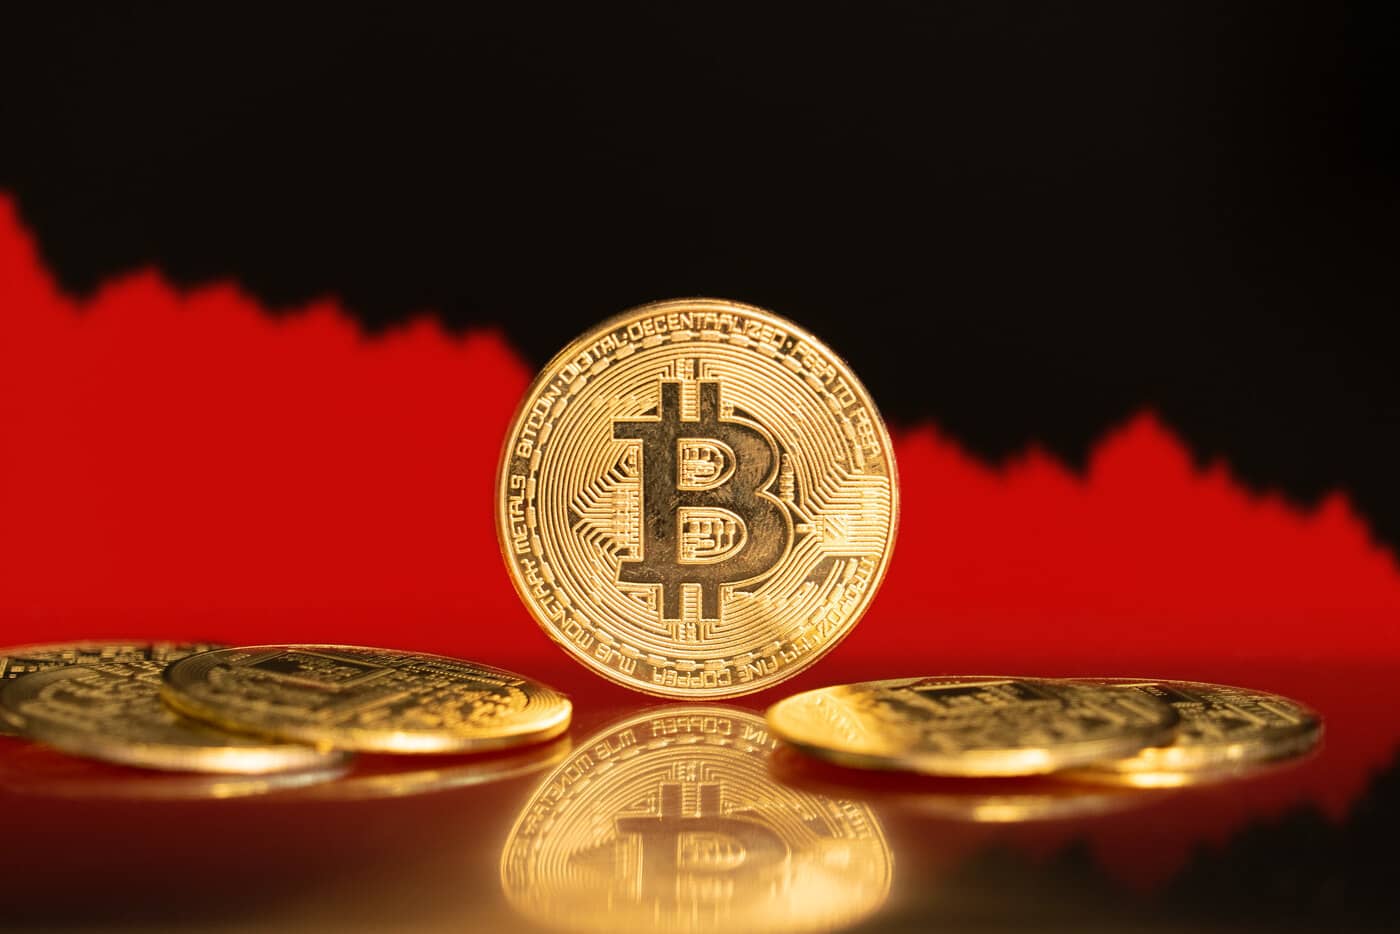 Bitcoin Nearing ‘Danger Zone’ With Historical Pre-Halving Retrace Patterns Looming